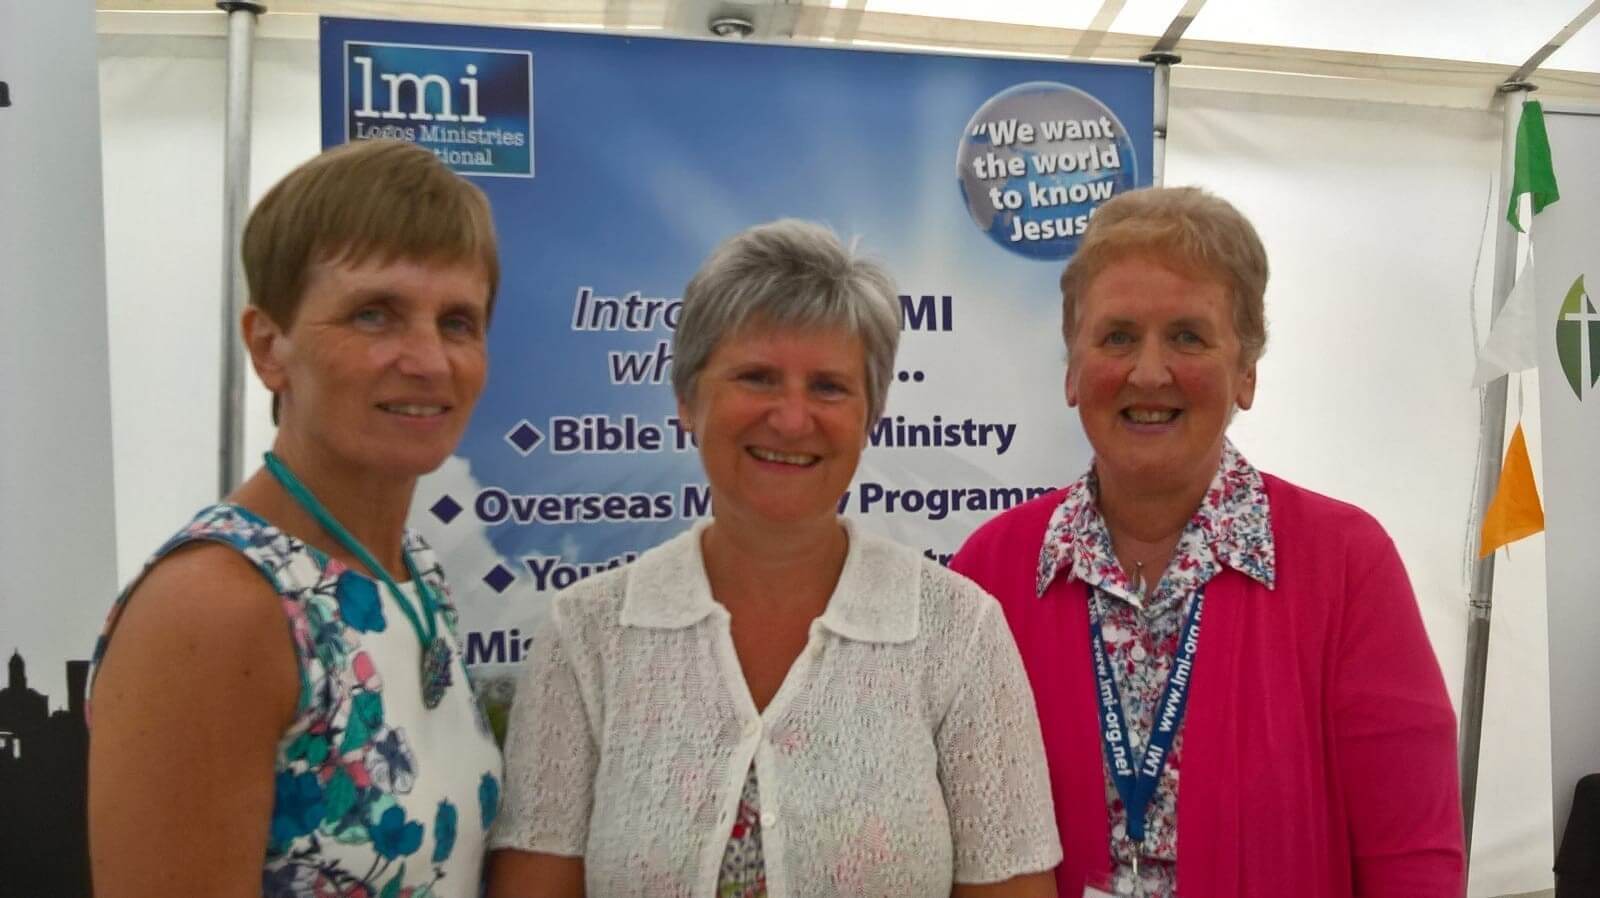 LMI would like to thank those who attended the LMI stand at Keswick 2018 in Portstewart